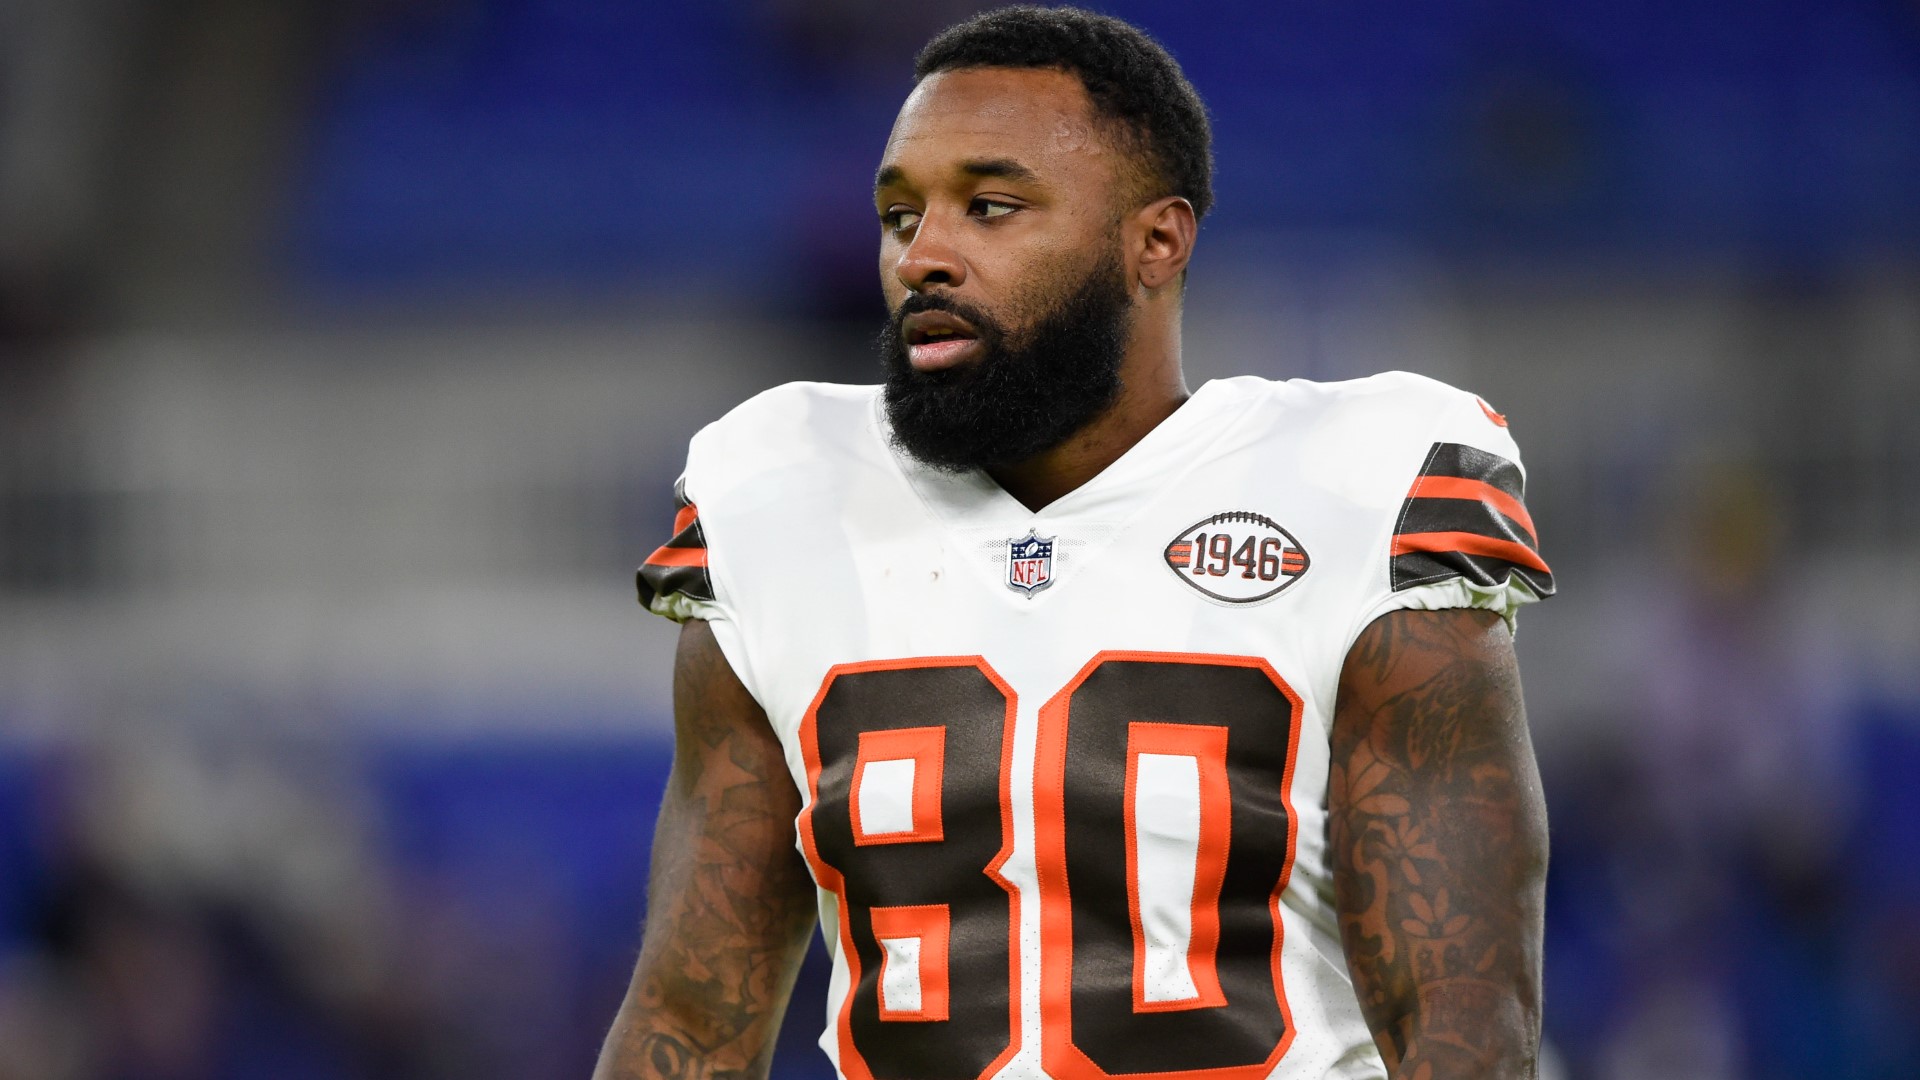 Speaking with reporters at the NFL Scouting Combine, Cleveland Browns general manager Andrew Berry gave an update on Jarvis Landry's future with the team.